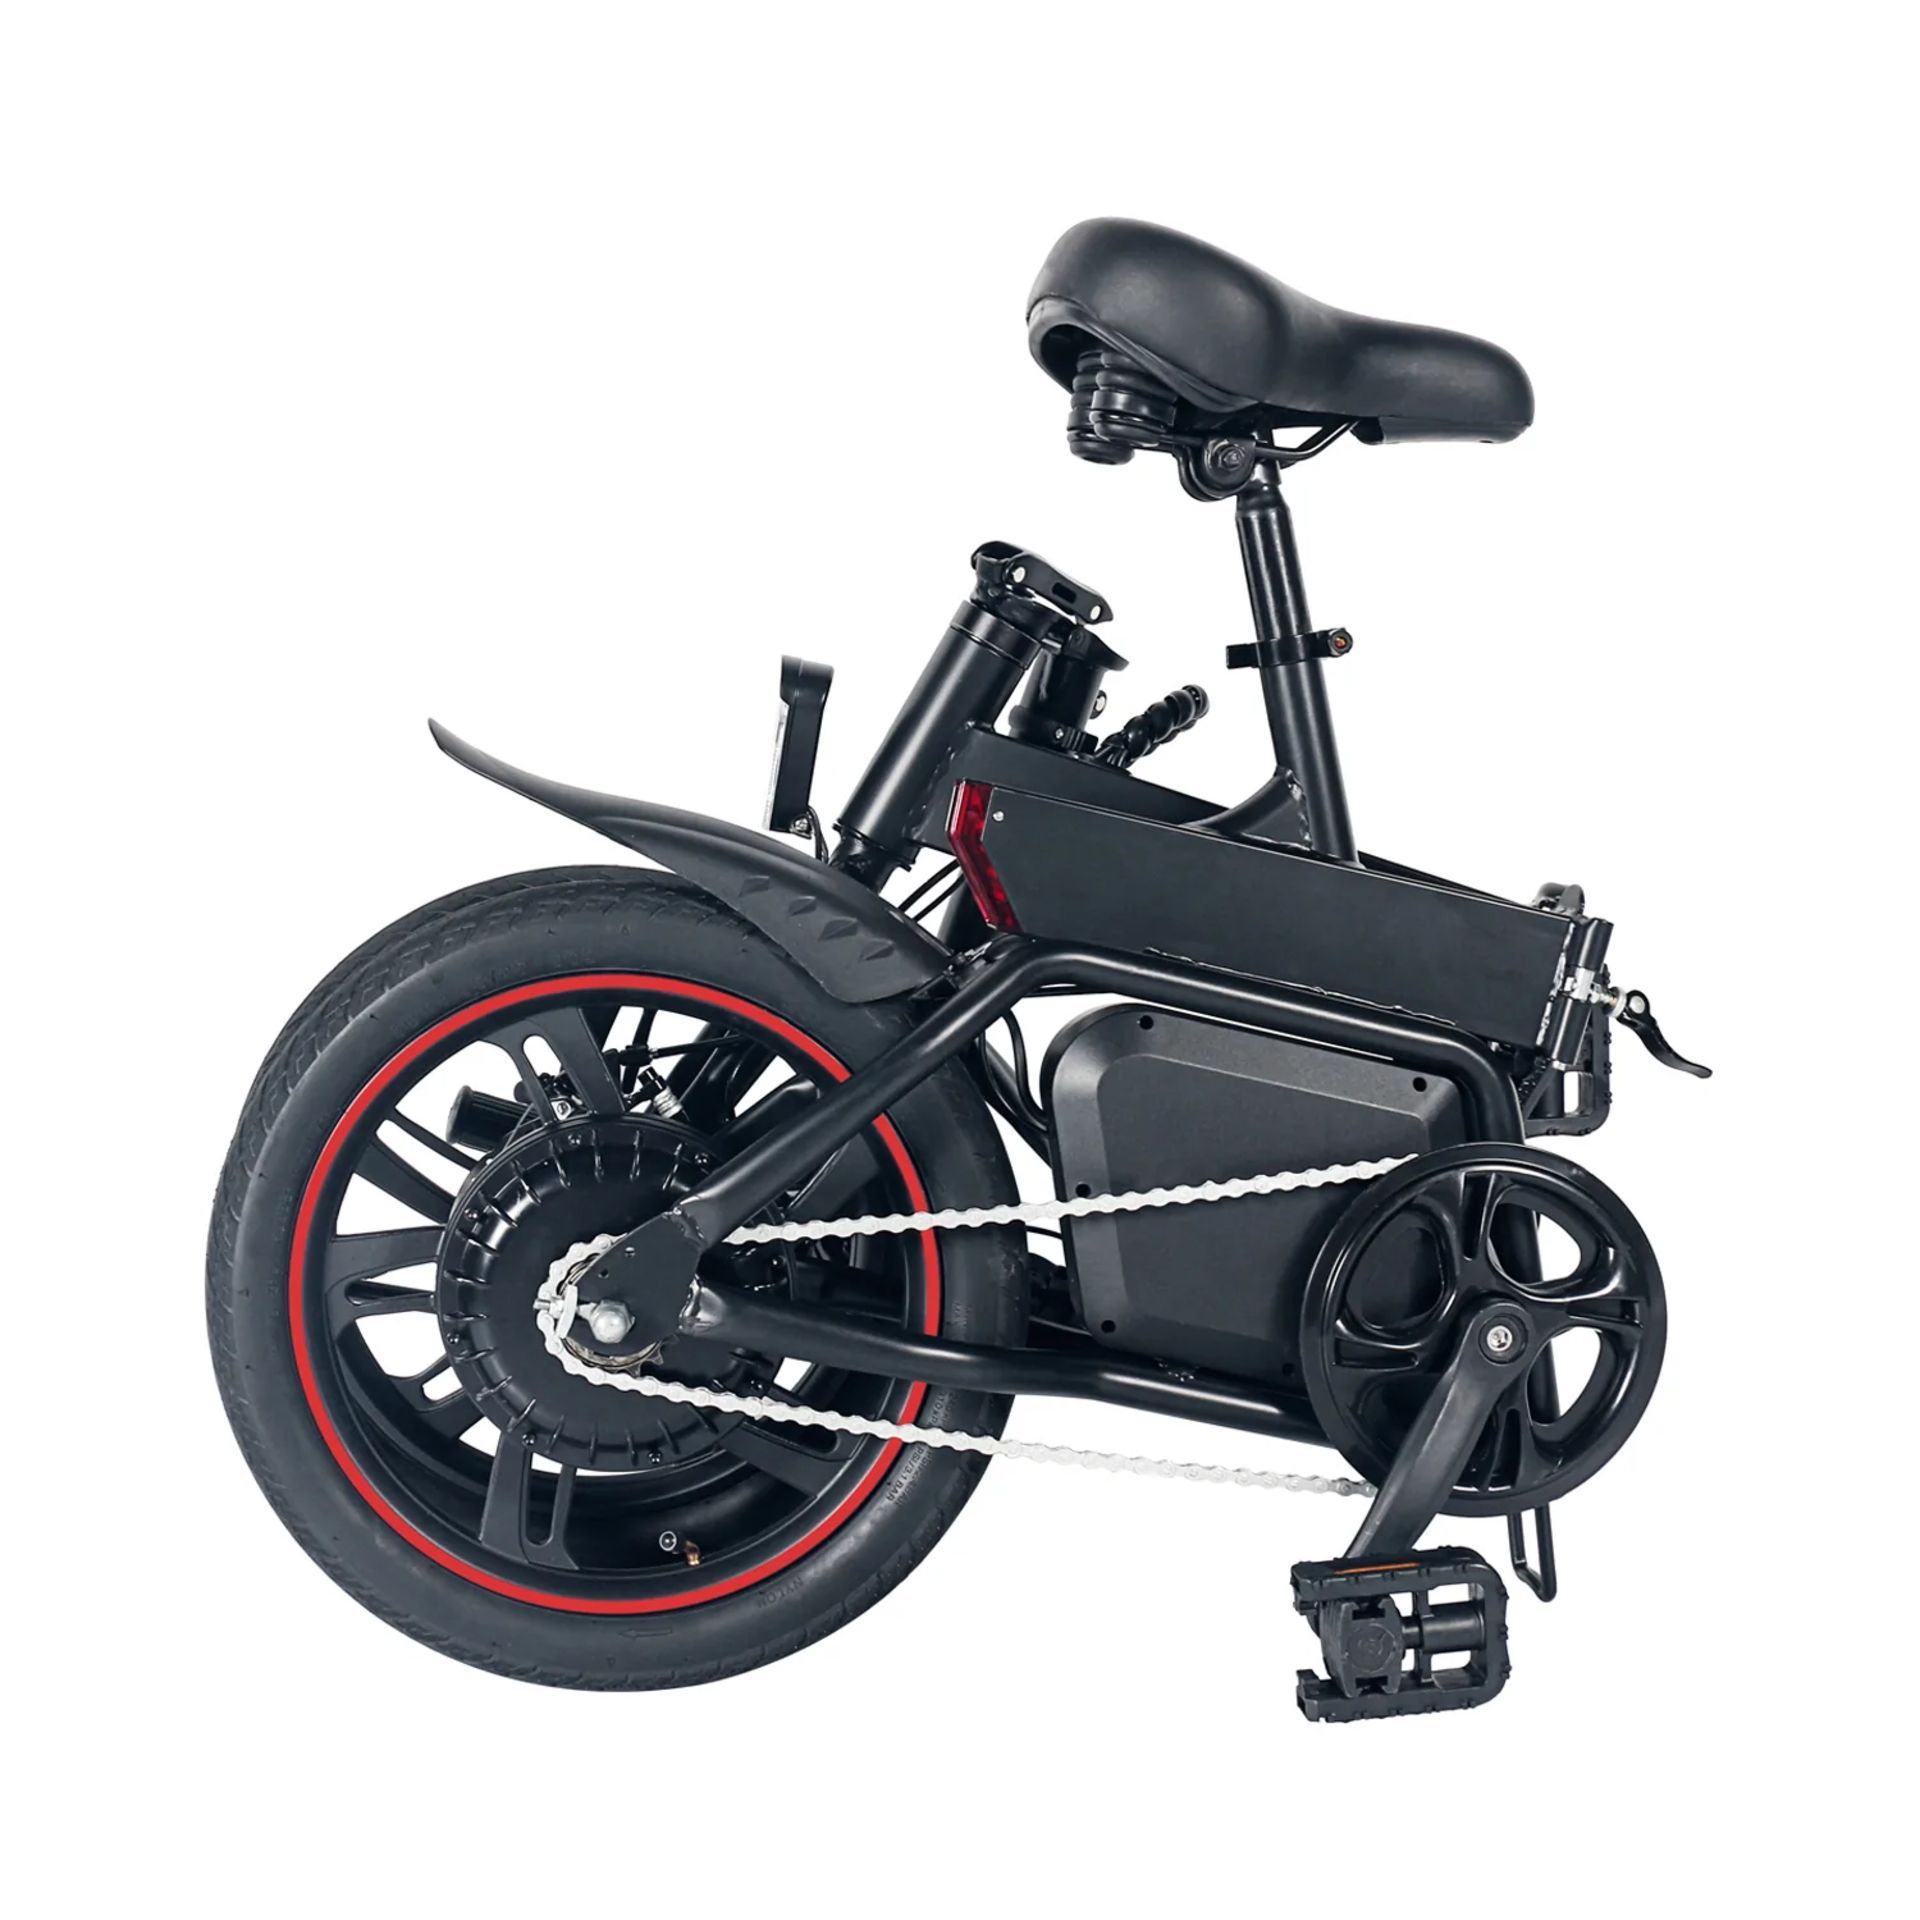 Windgoo B20 Pro Electric Bike. RRP £1,100.99. With 16-inch-wide tires and a frame of upgraded - Bild 5 aus 6